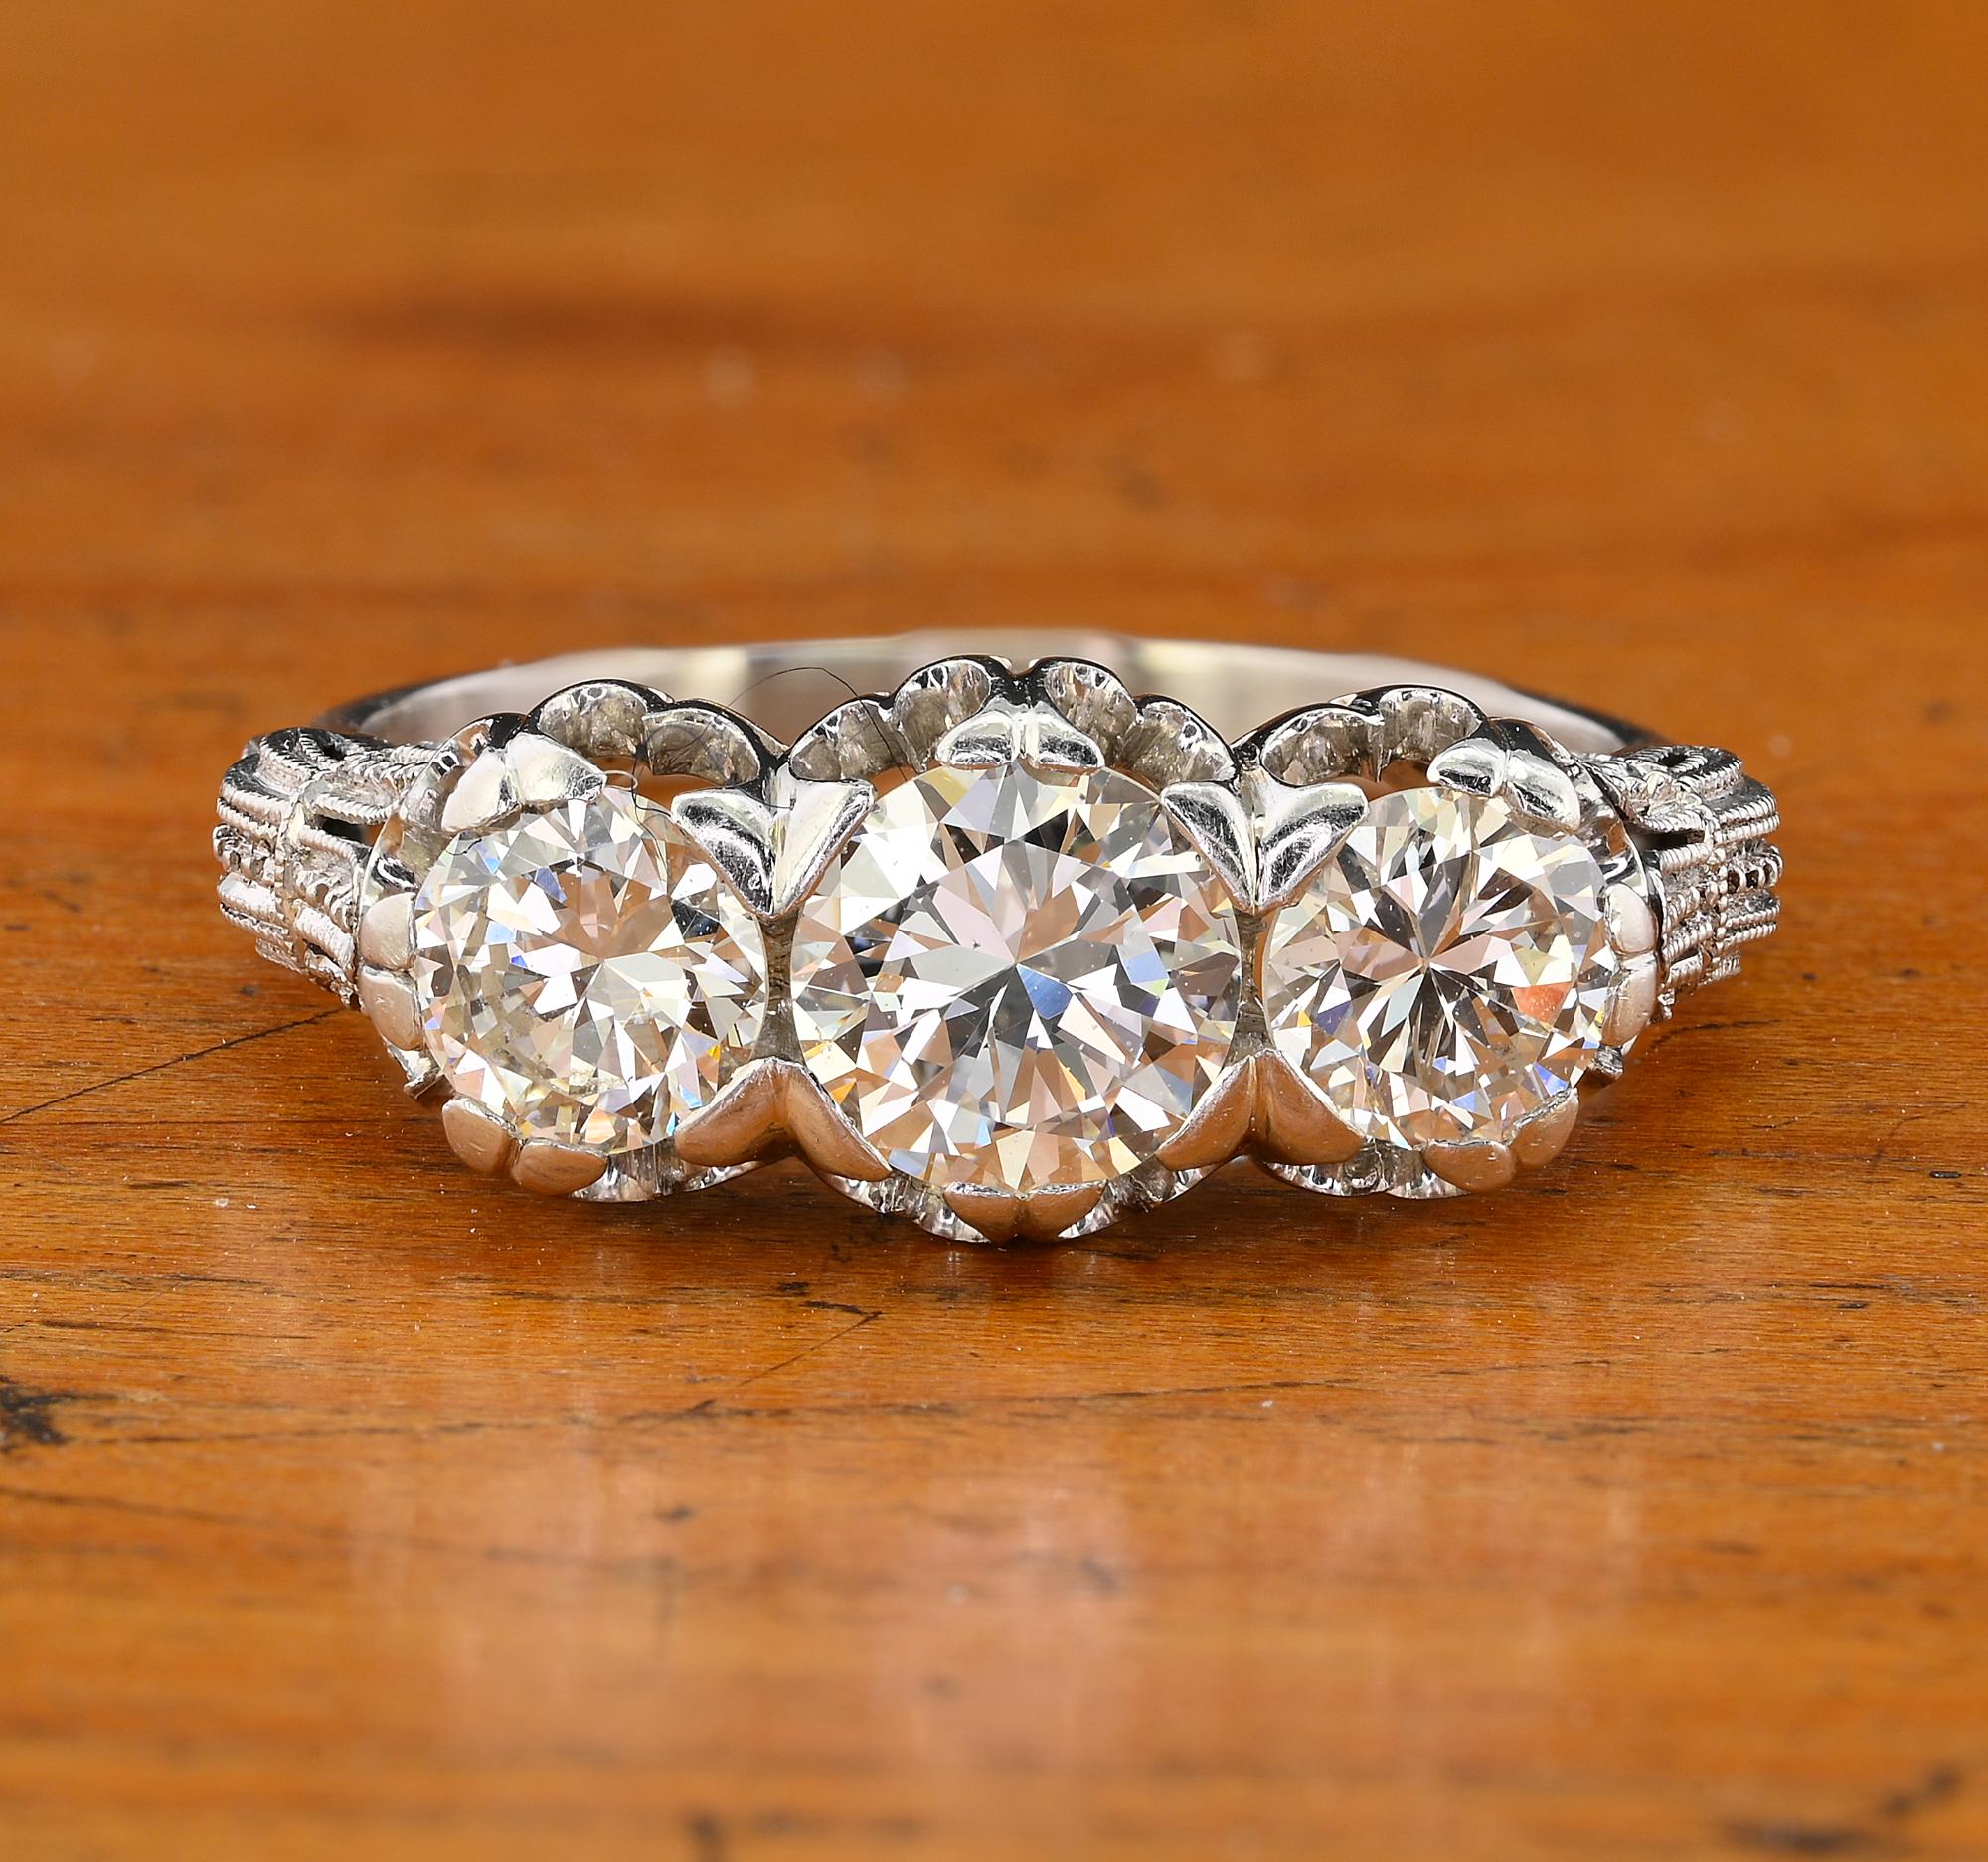 This outstanding antique Diamond ring is Art Deco period, 1925 ca
A distinctive example of the era superbly hand crafted of solid Platinum in a more than exquisite design
Set with a selection of bright white early transitional brilliant cut full of